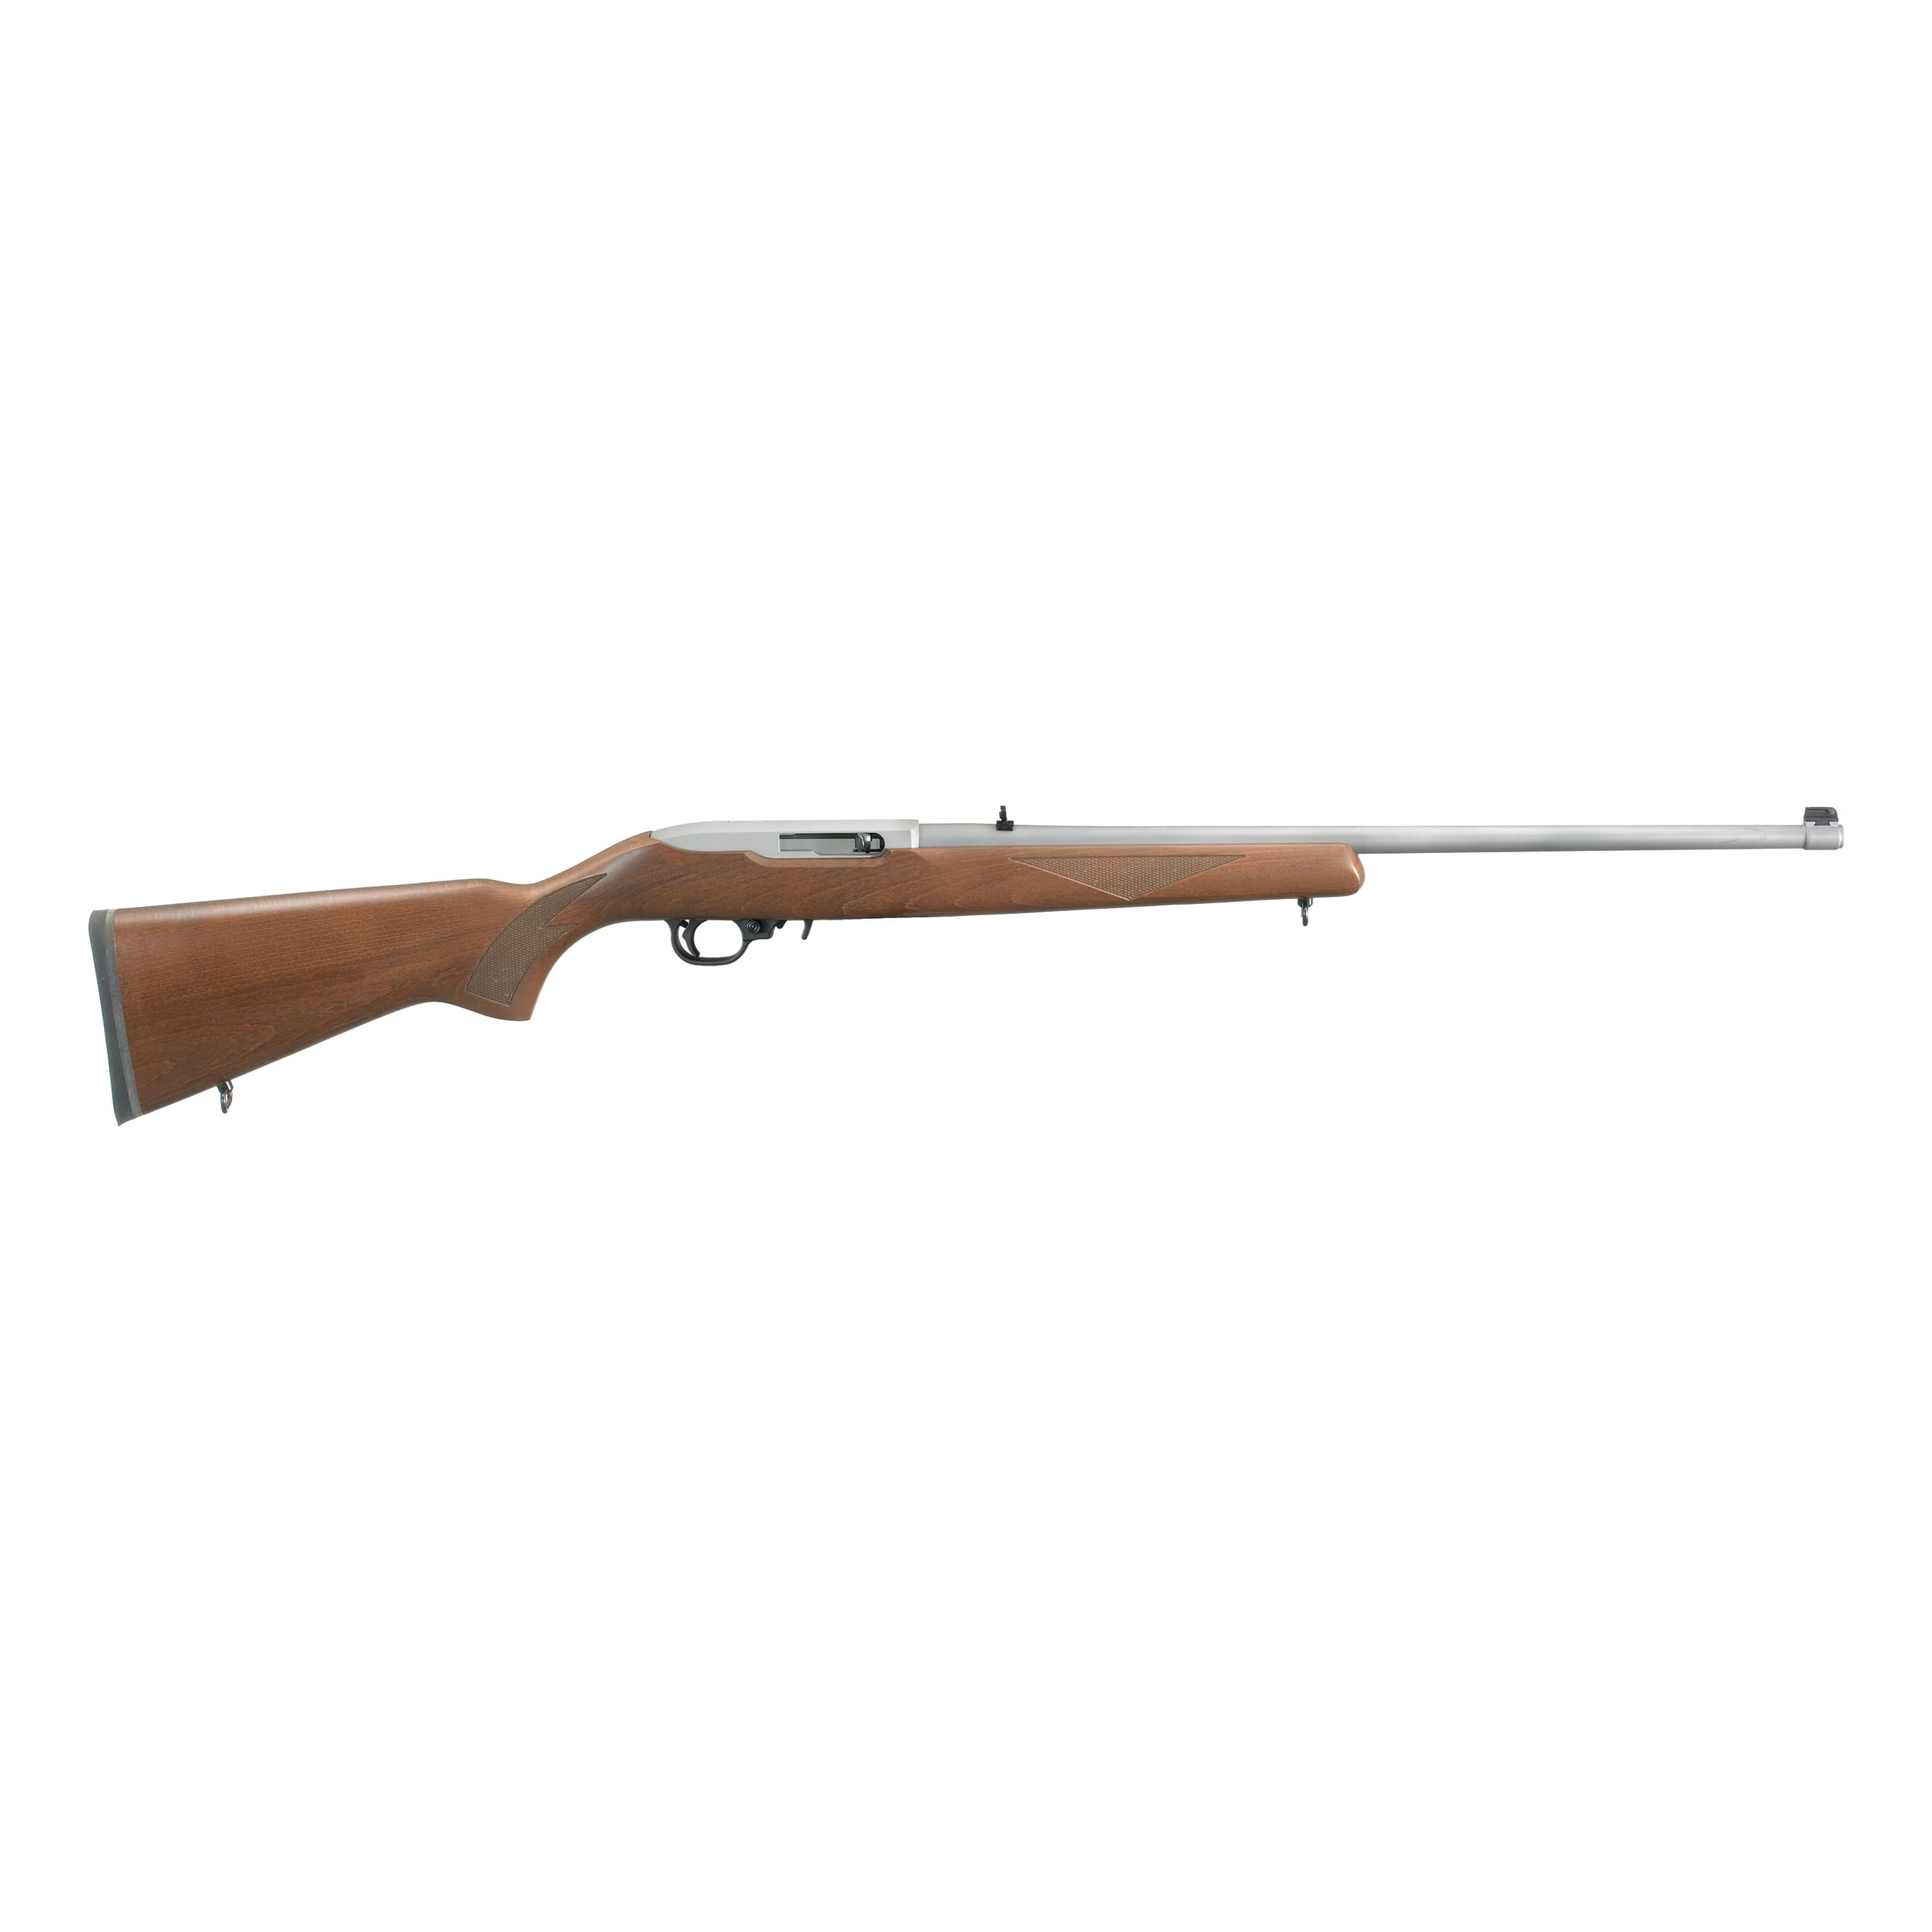 Ruger® 10/22® Birchwood Sporter Semi-Automatic Rifle - Stainless Steel